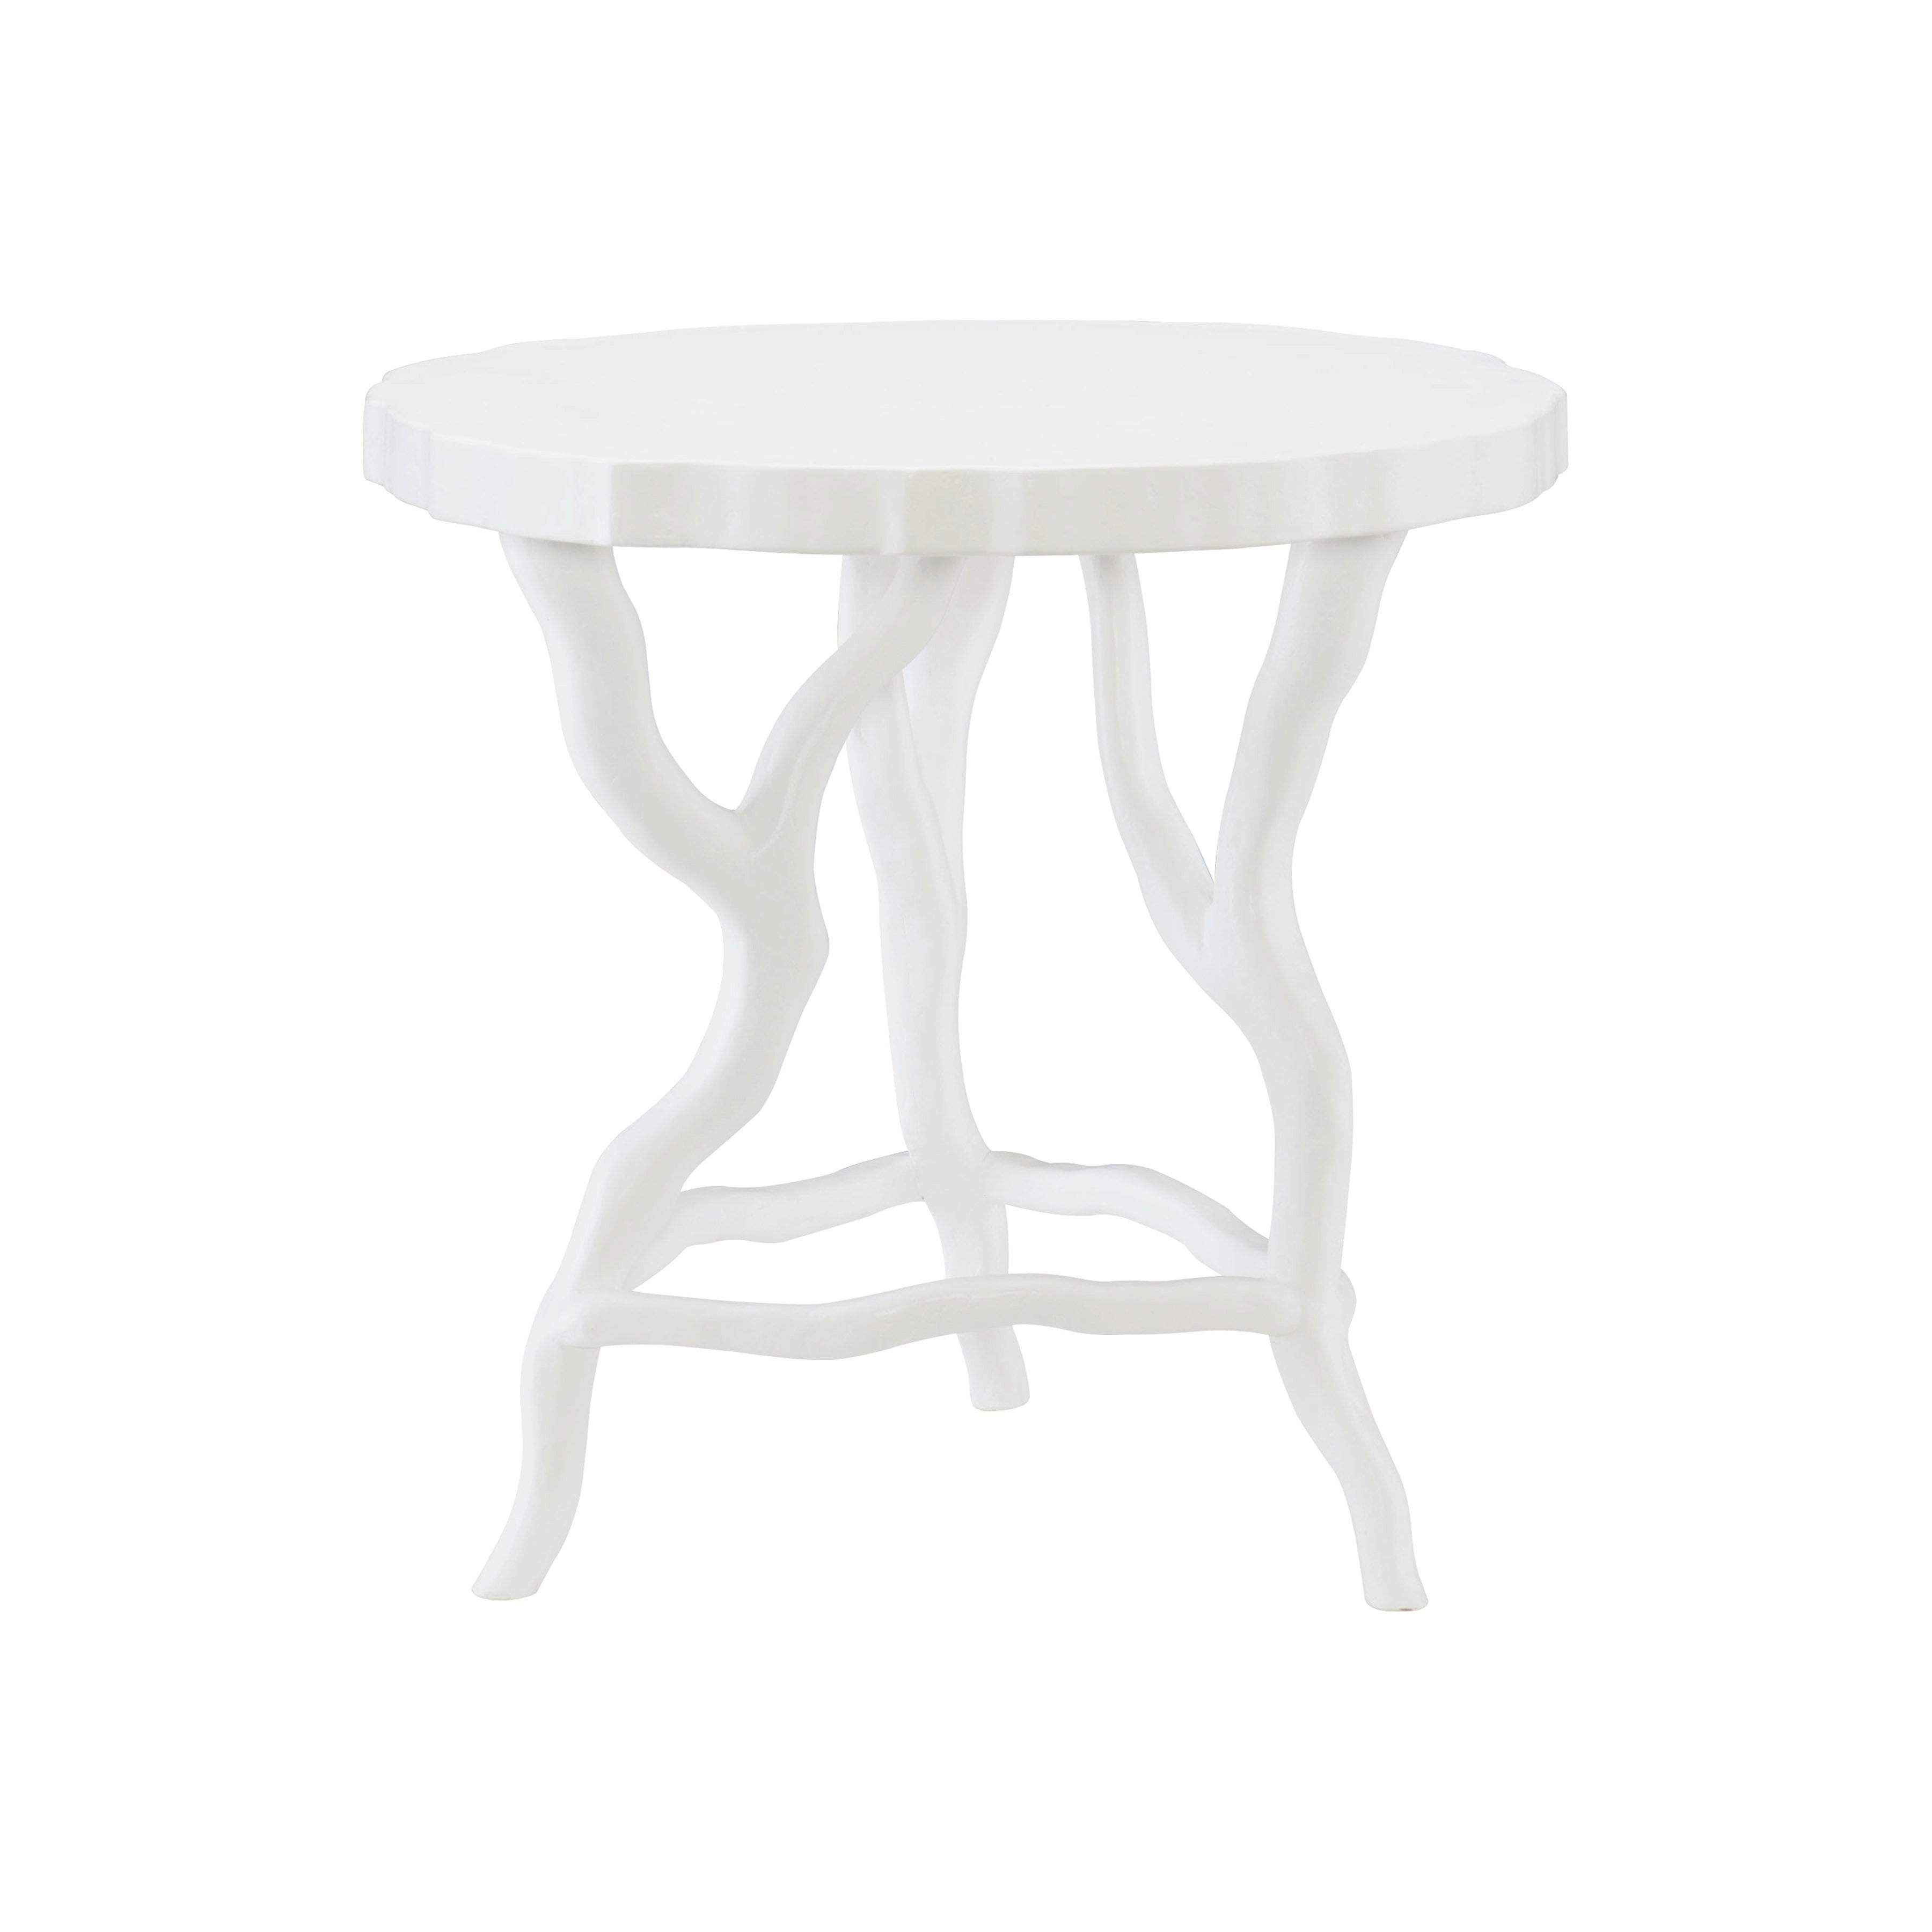 Arbor Round Chairside Table